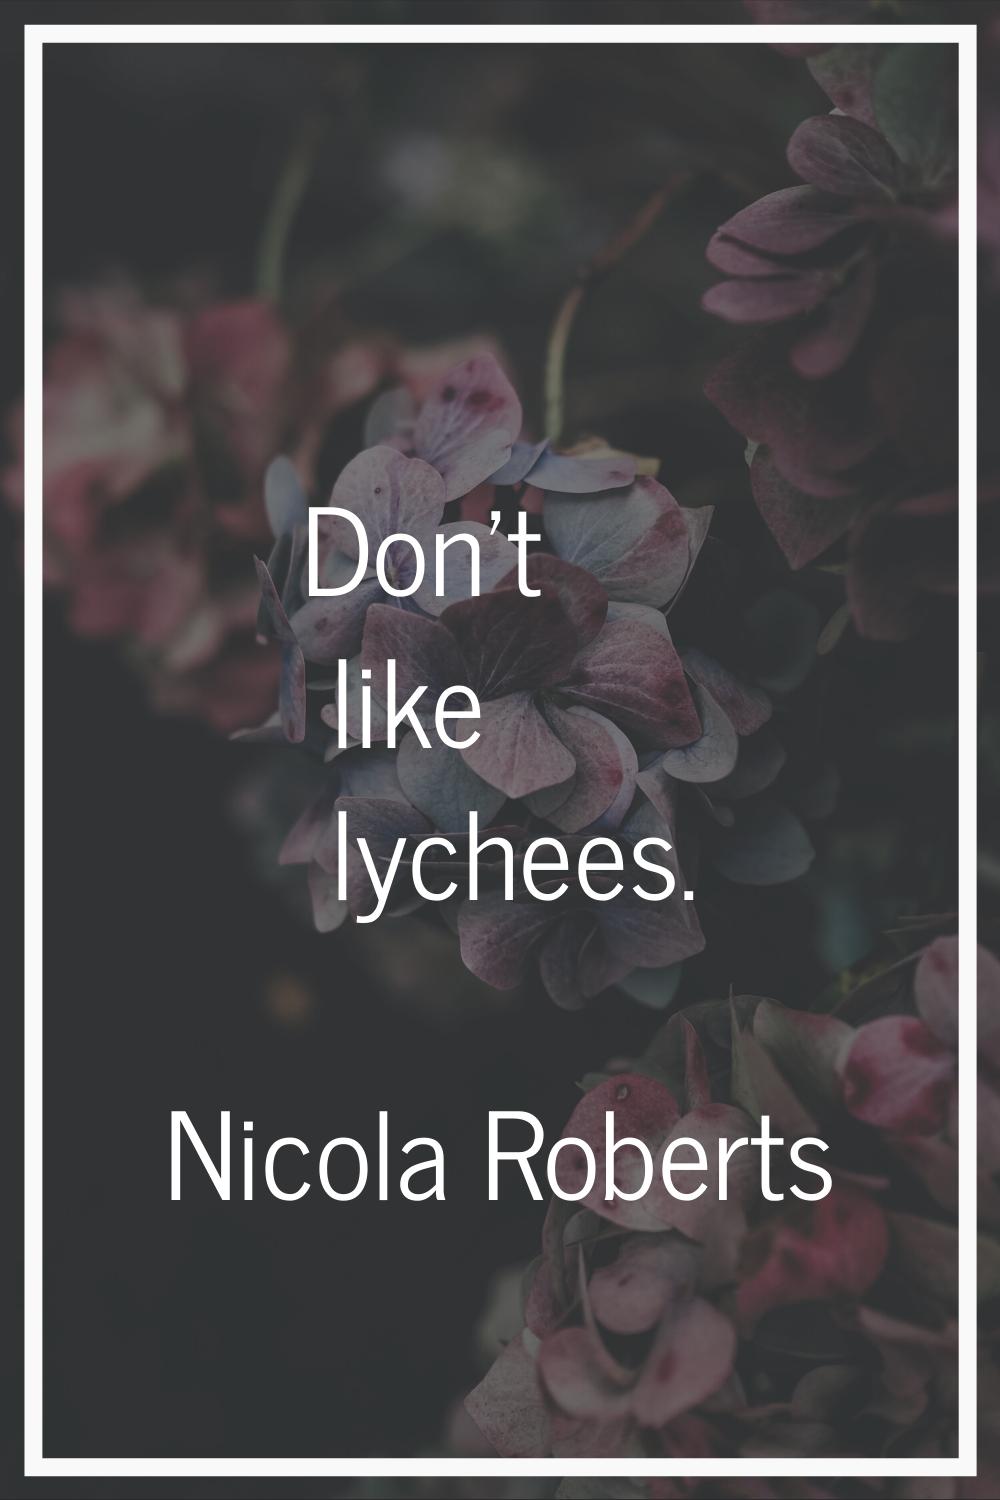 Don't like lychees.